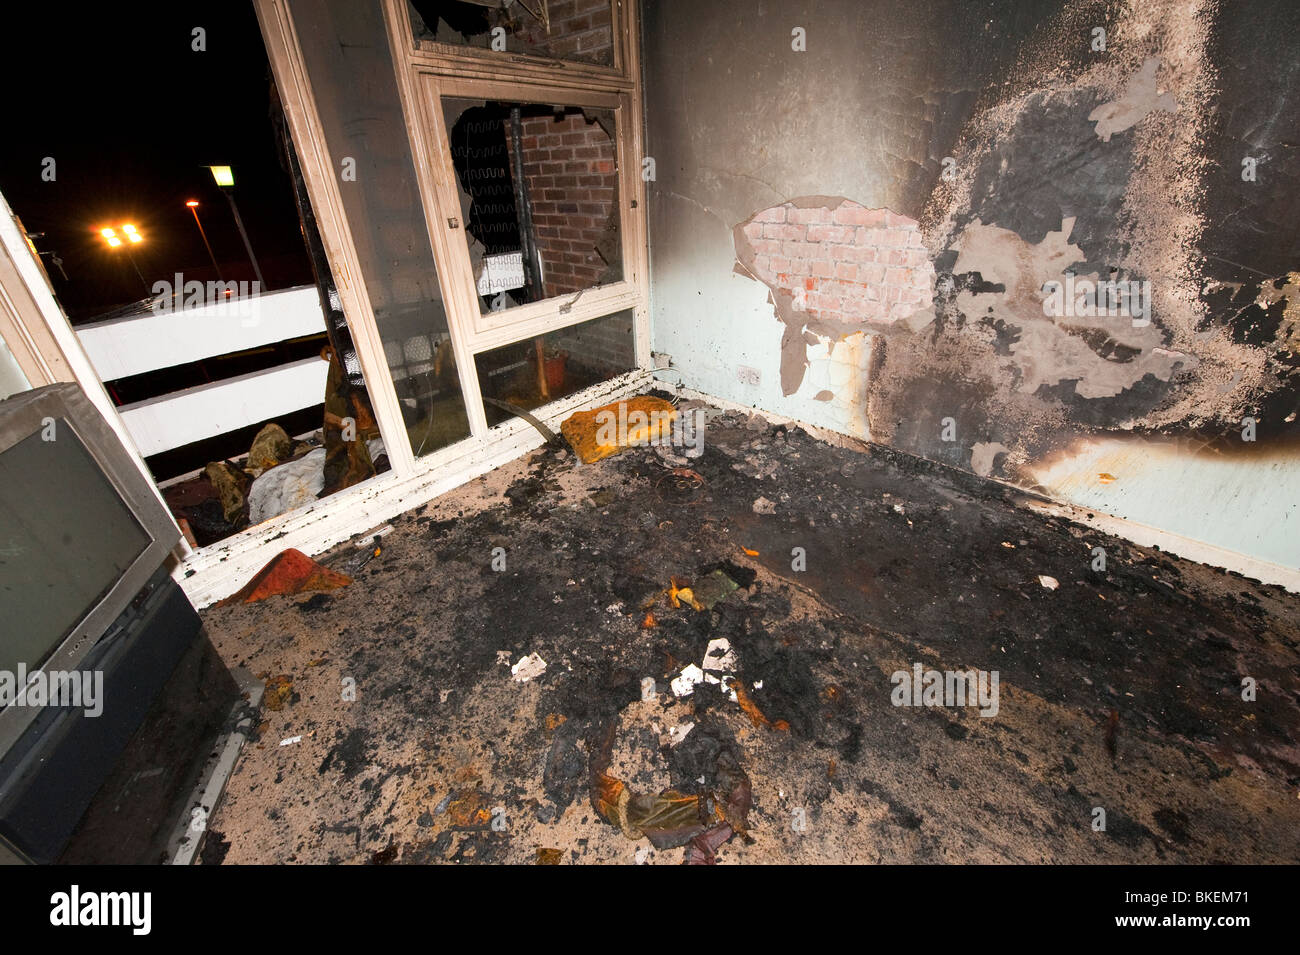 Burn Pattern On Wall From Domestic Sofa Fire Stock Photo 29212037